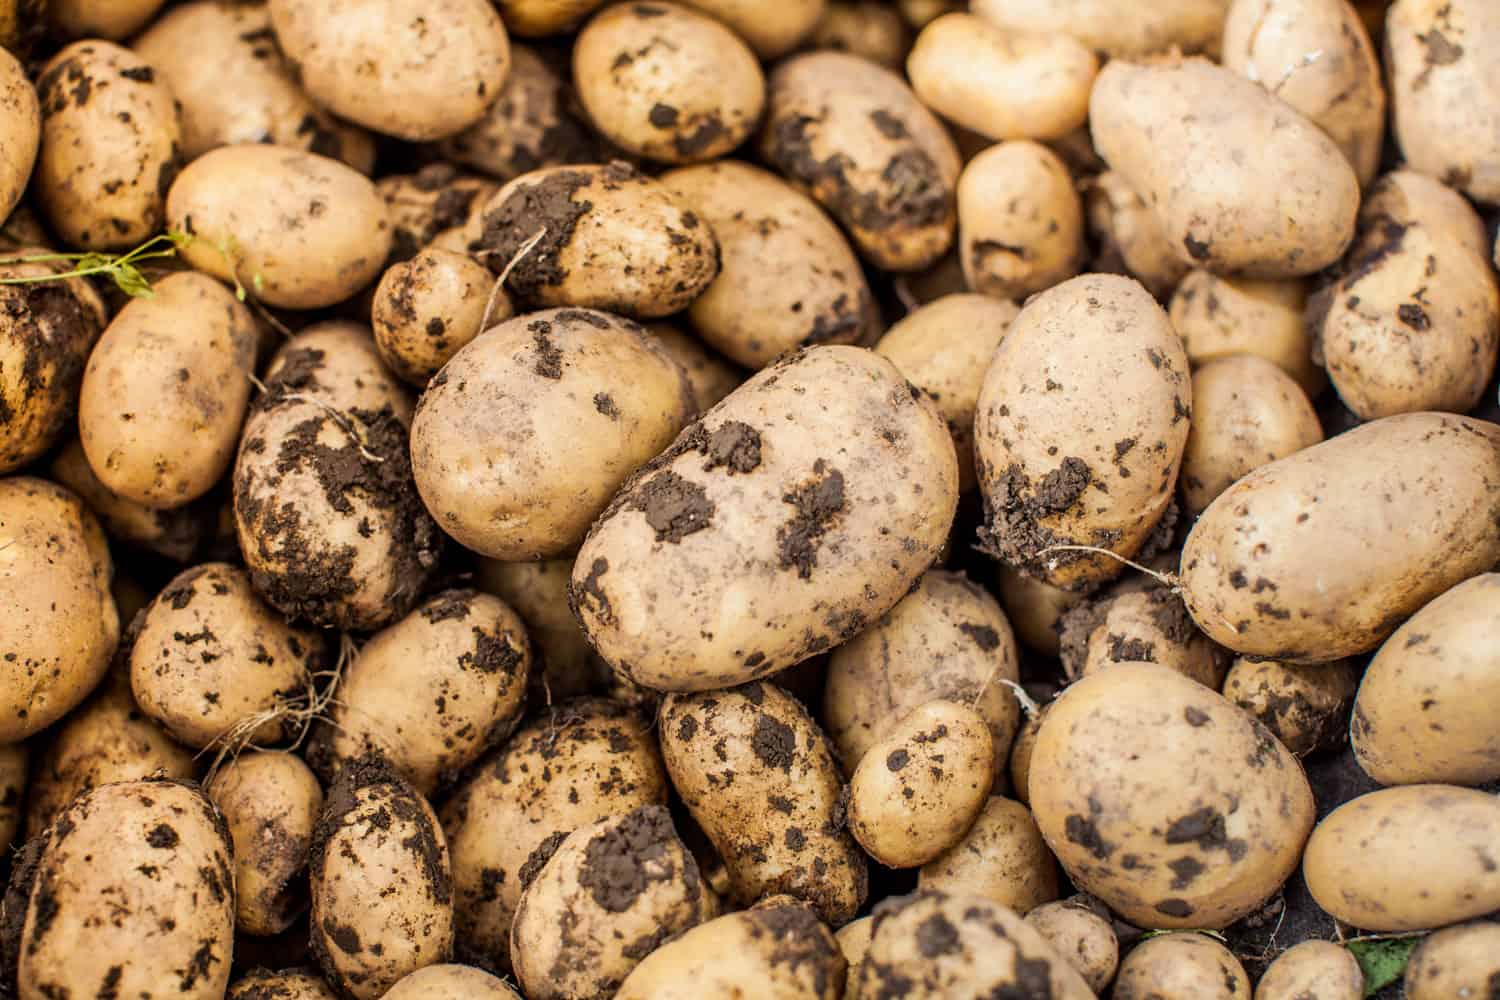 Newly harvested potatoes